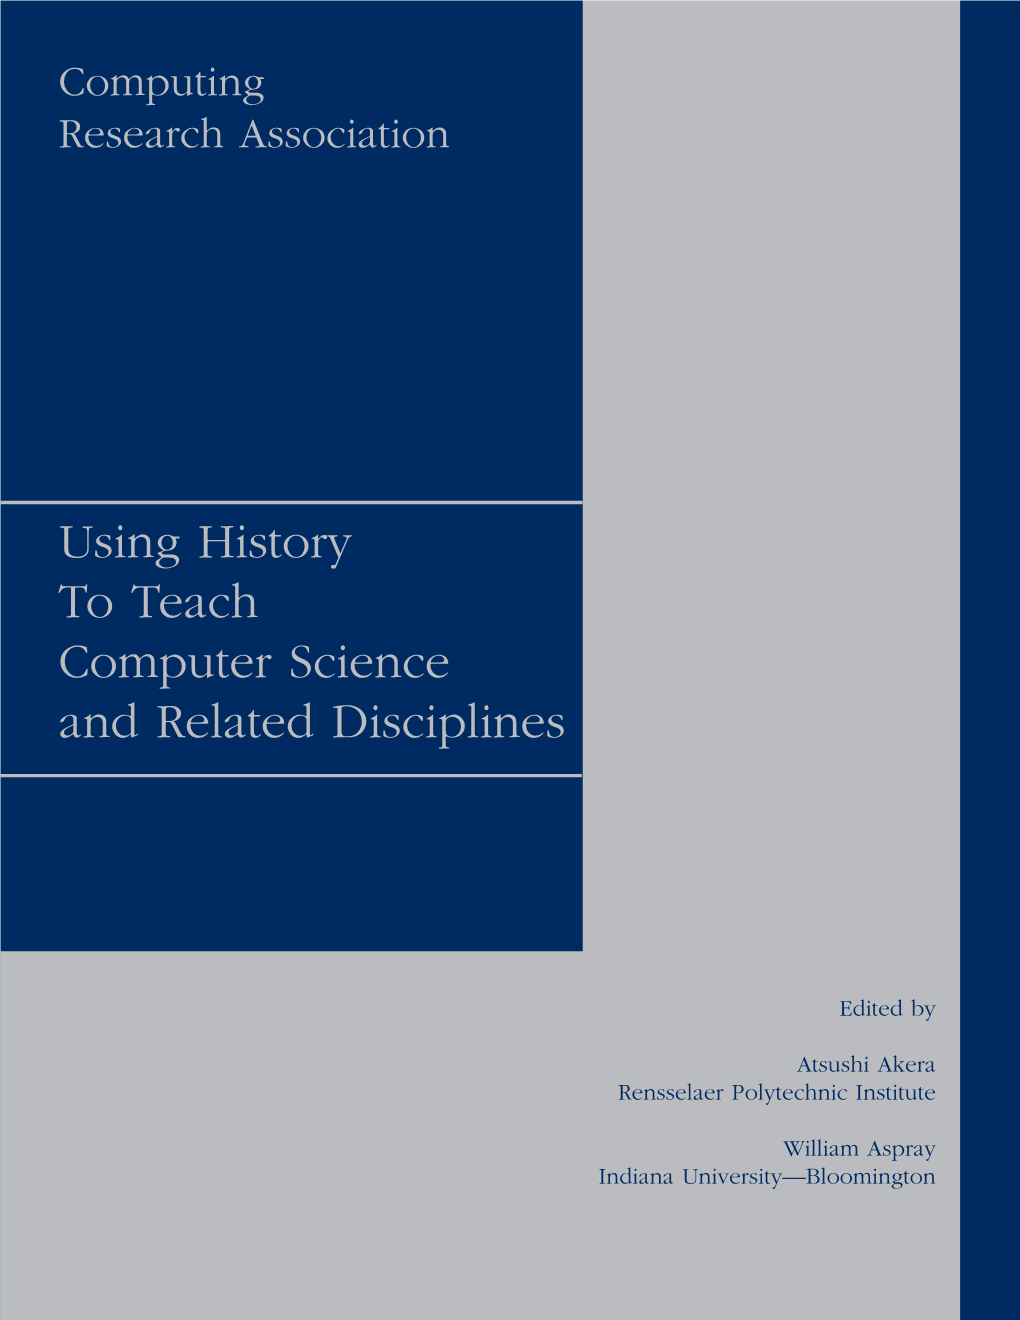 Using History to Teach Computer Science and Related Disciplines